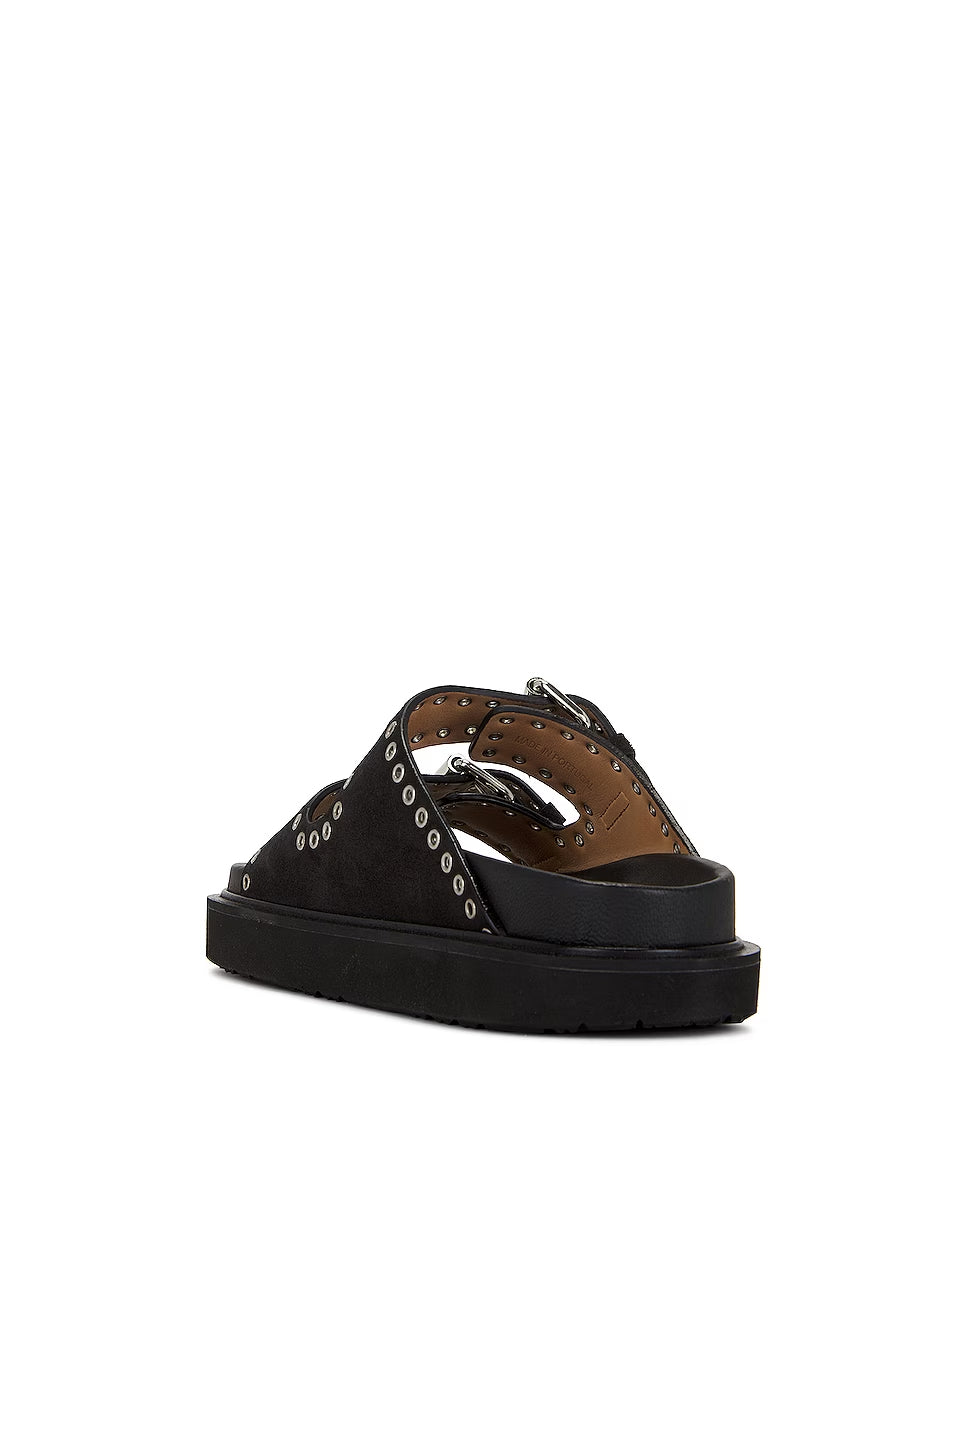 The Isabel Marant Lennya Sandals in Faded Black available at The New Trend Australia